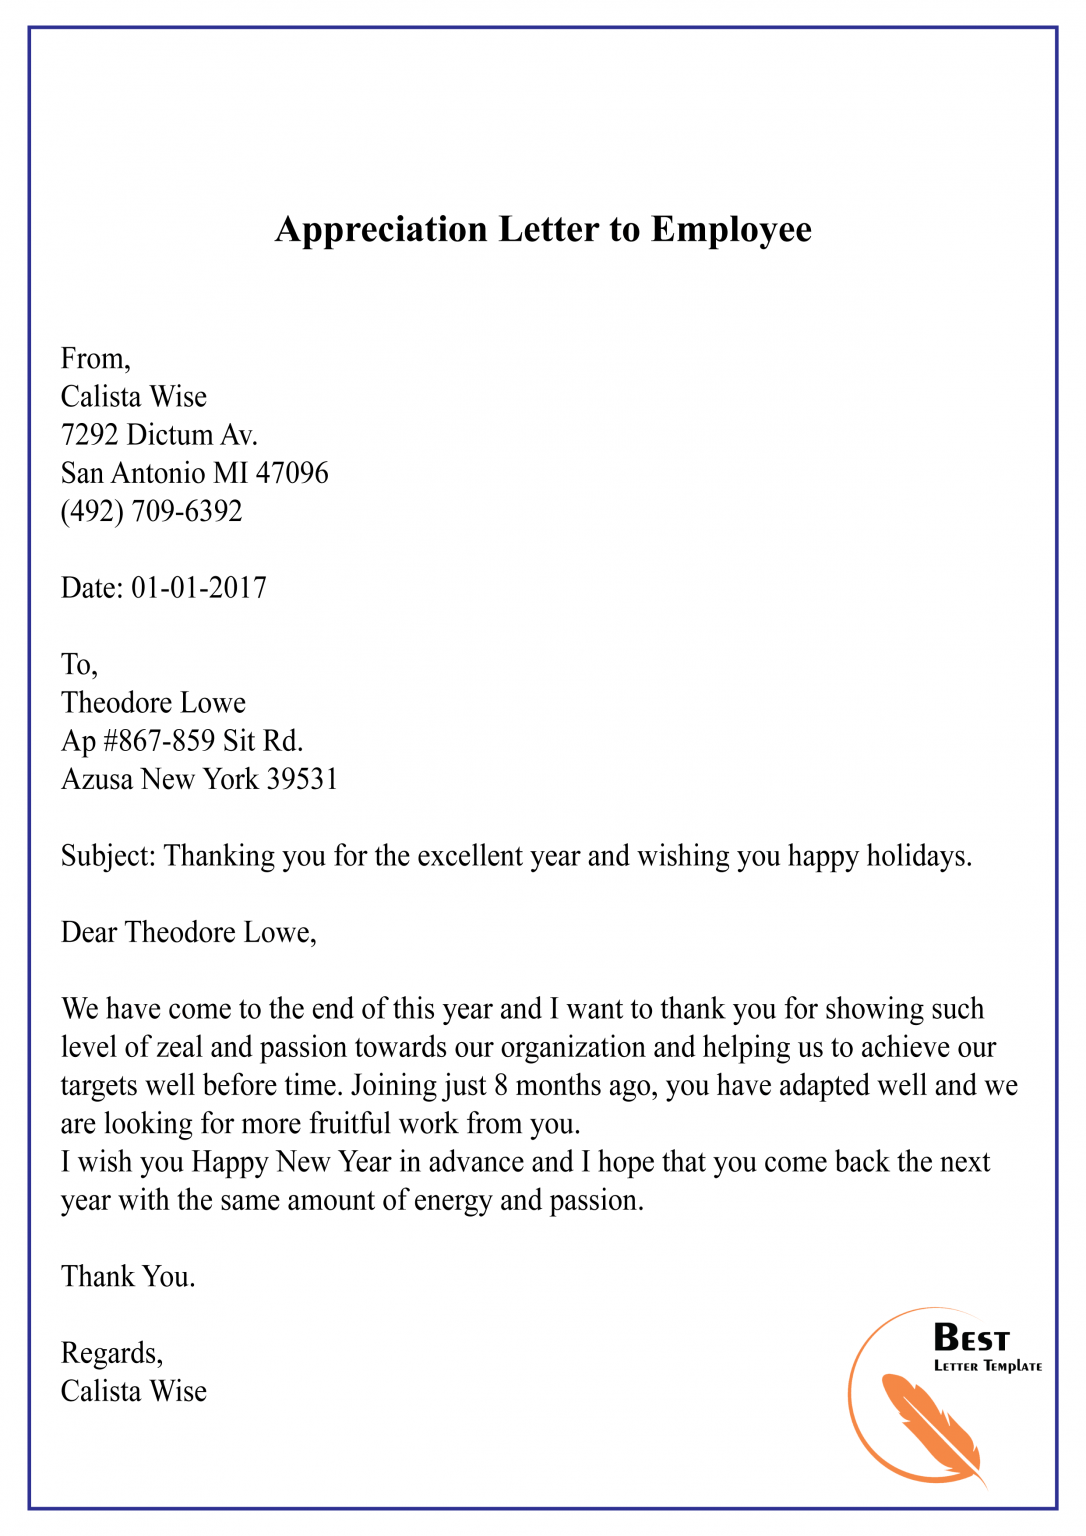 Appreciation Letter Template to Employee – Sample & Example